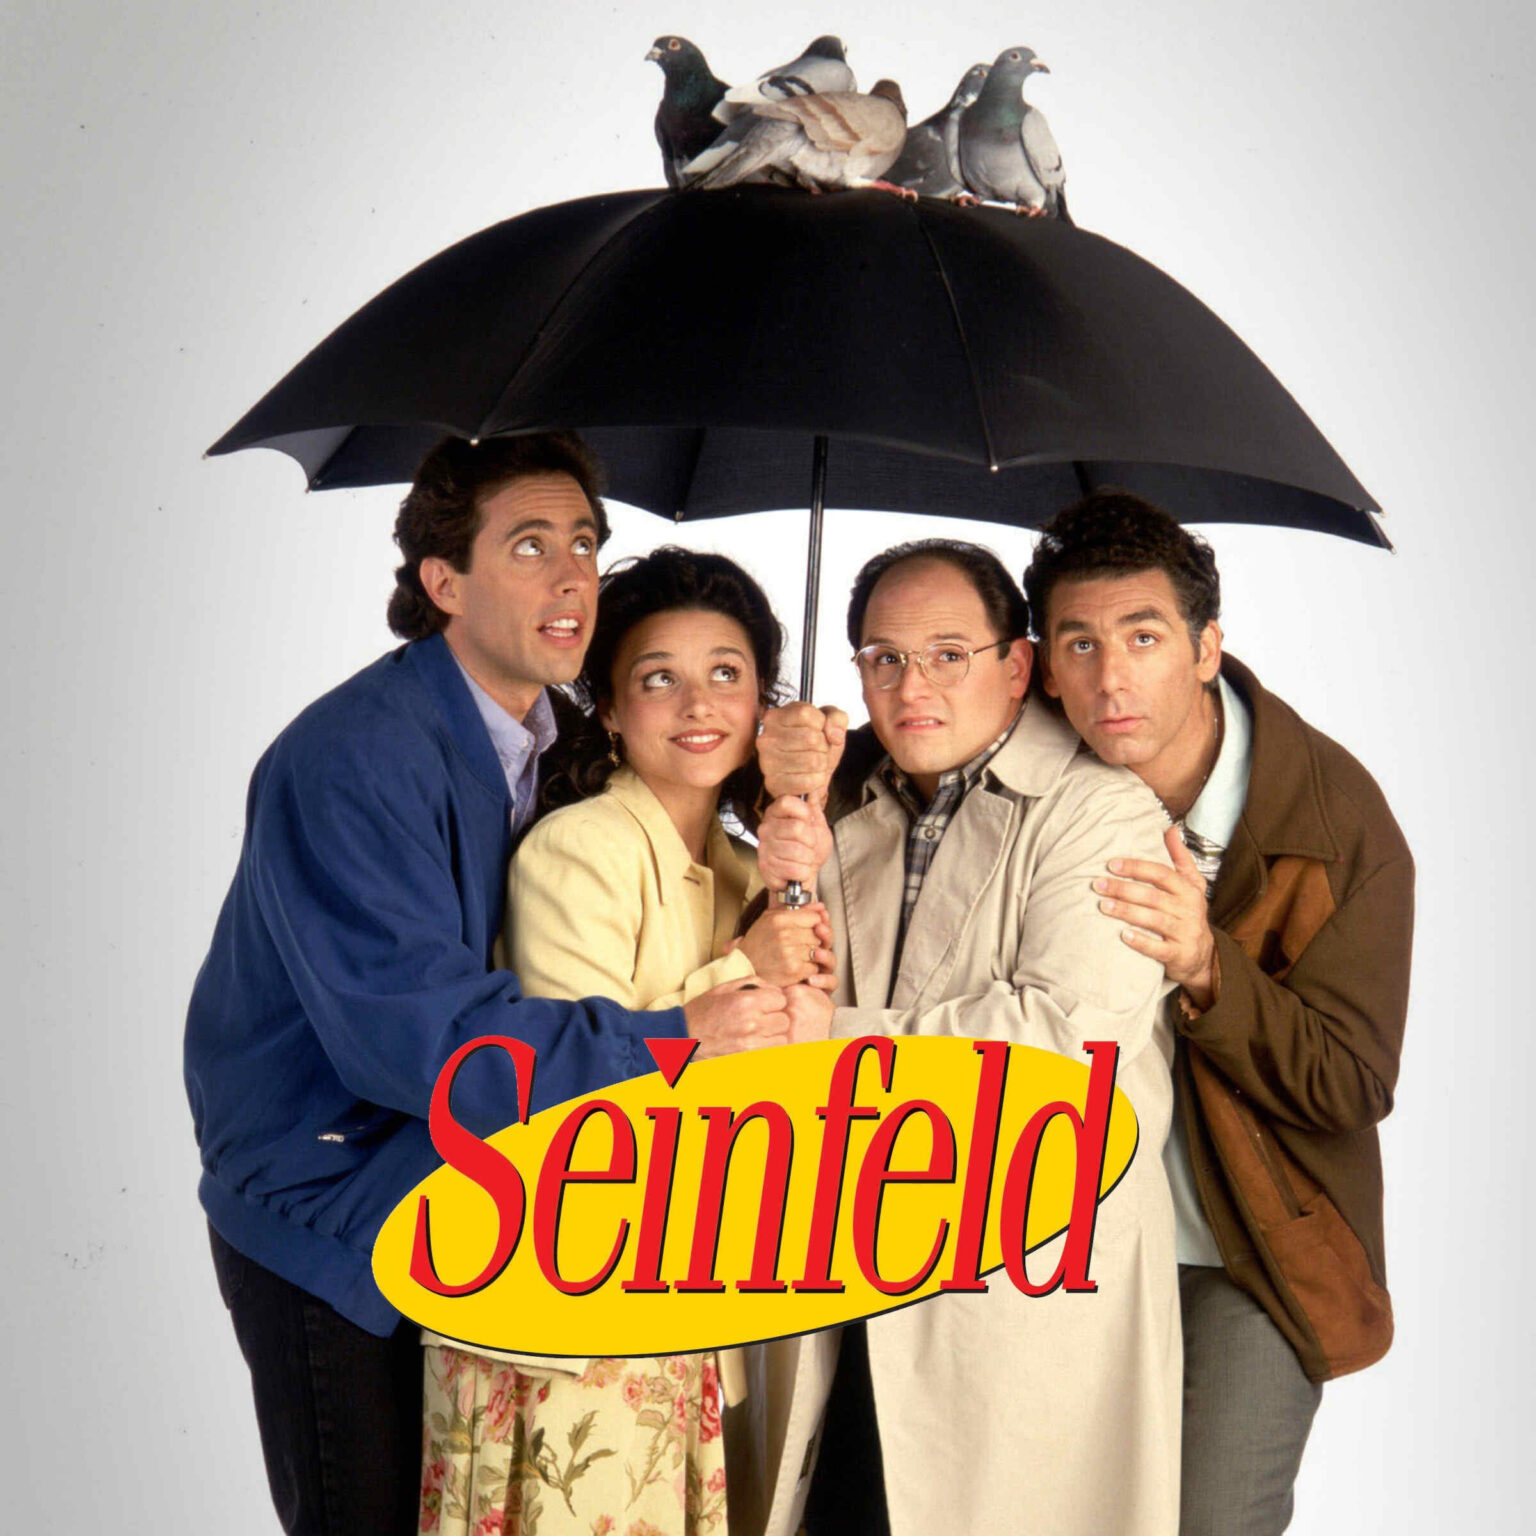 Seinfeld is certainly a show that could not be made today. Cringe along with us at some of the best, and the most problematic, episodes!